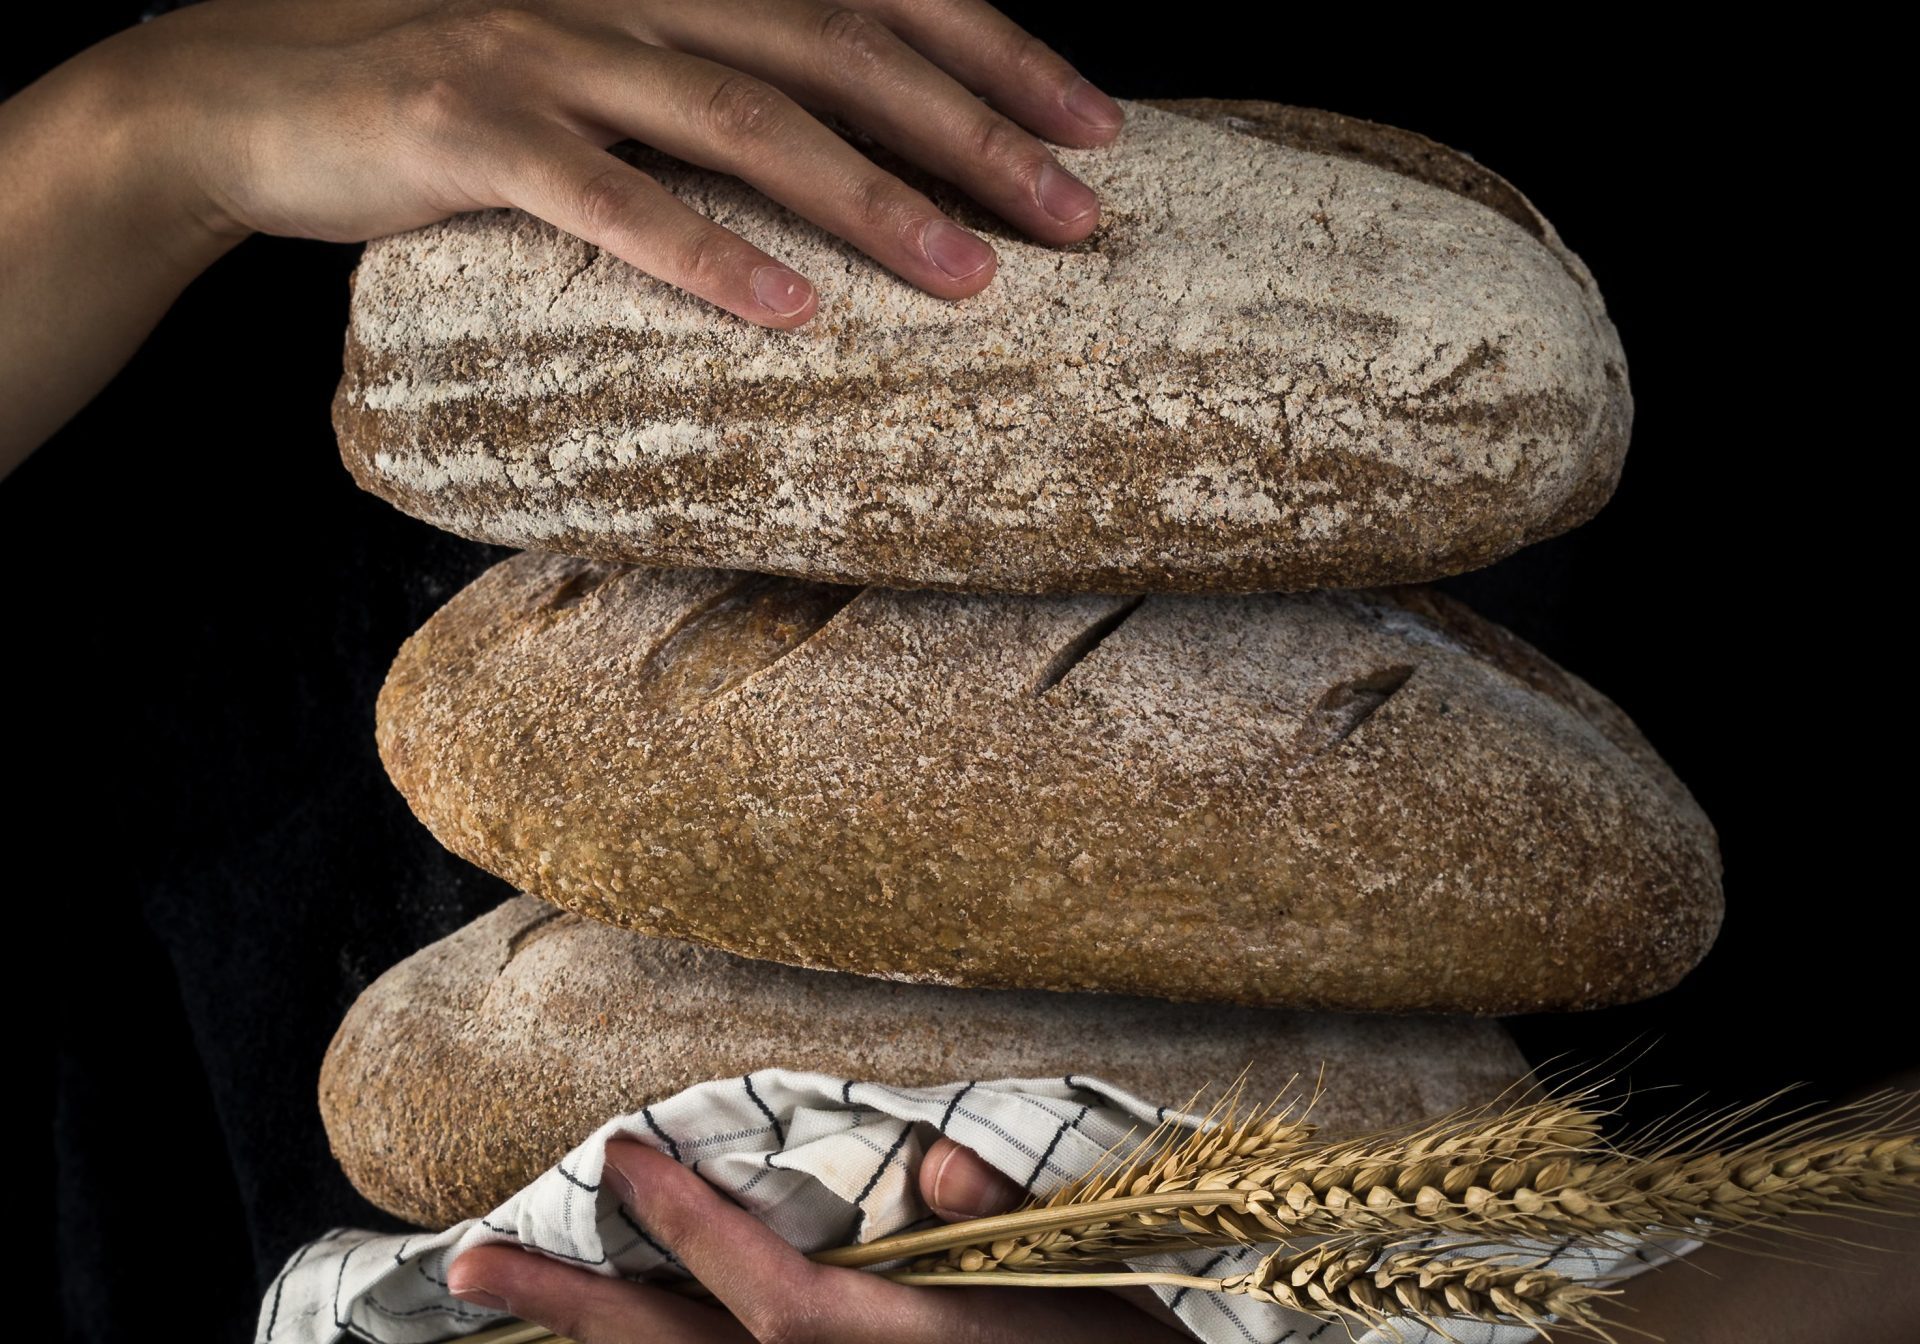 baking three different sorts of bread in. the hands of a woman, black background